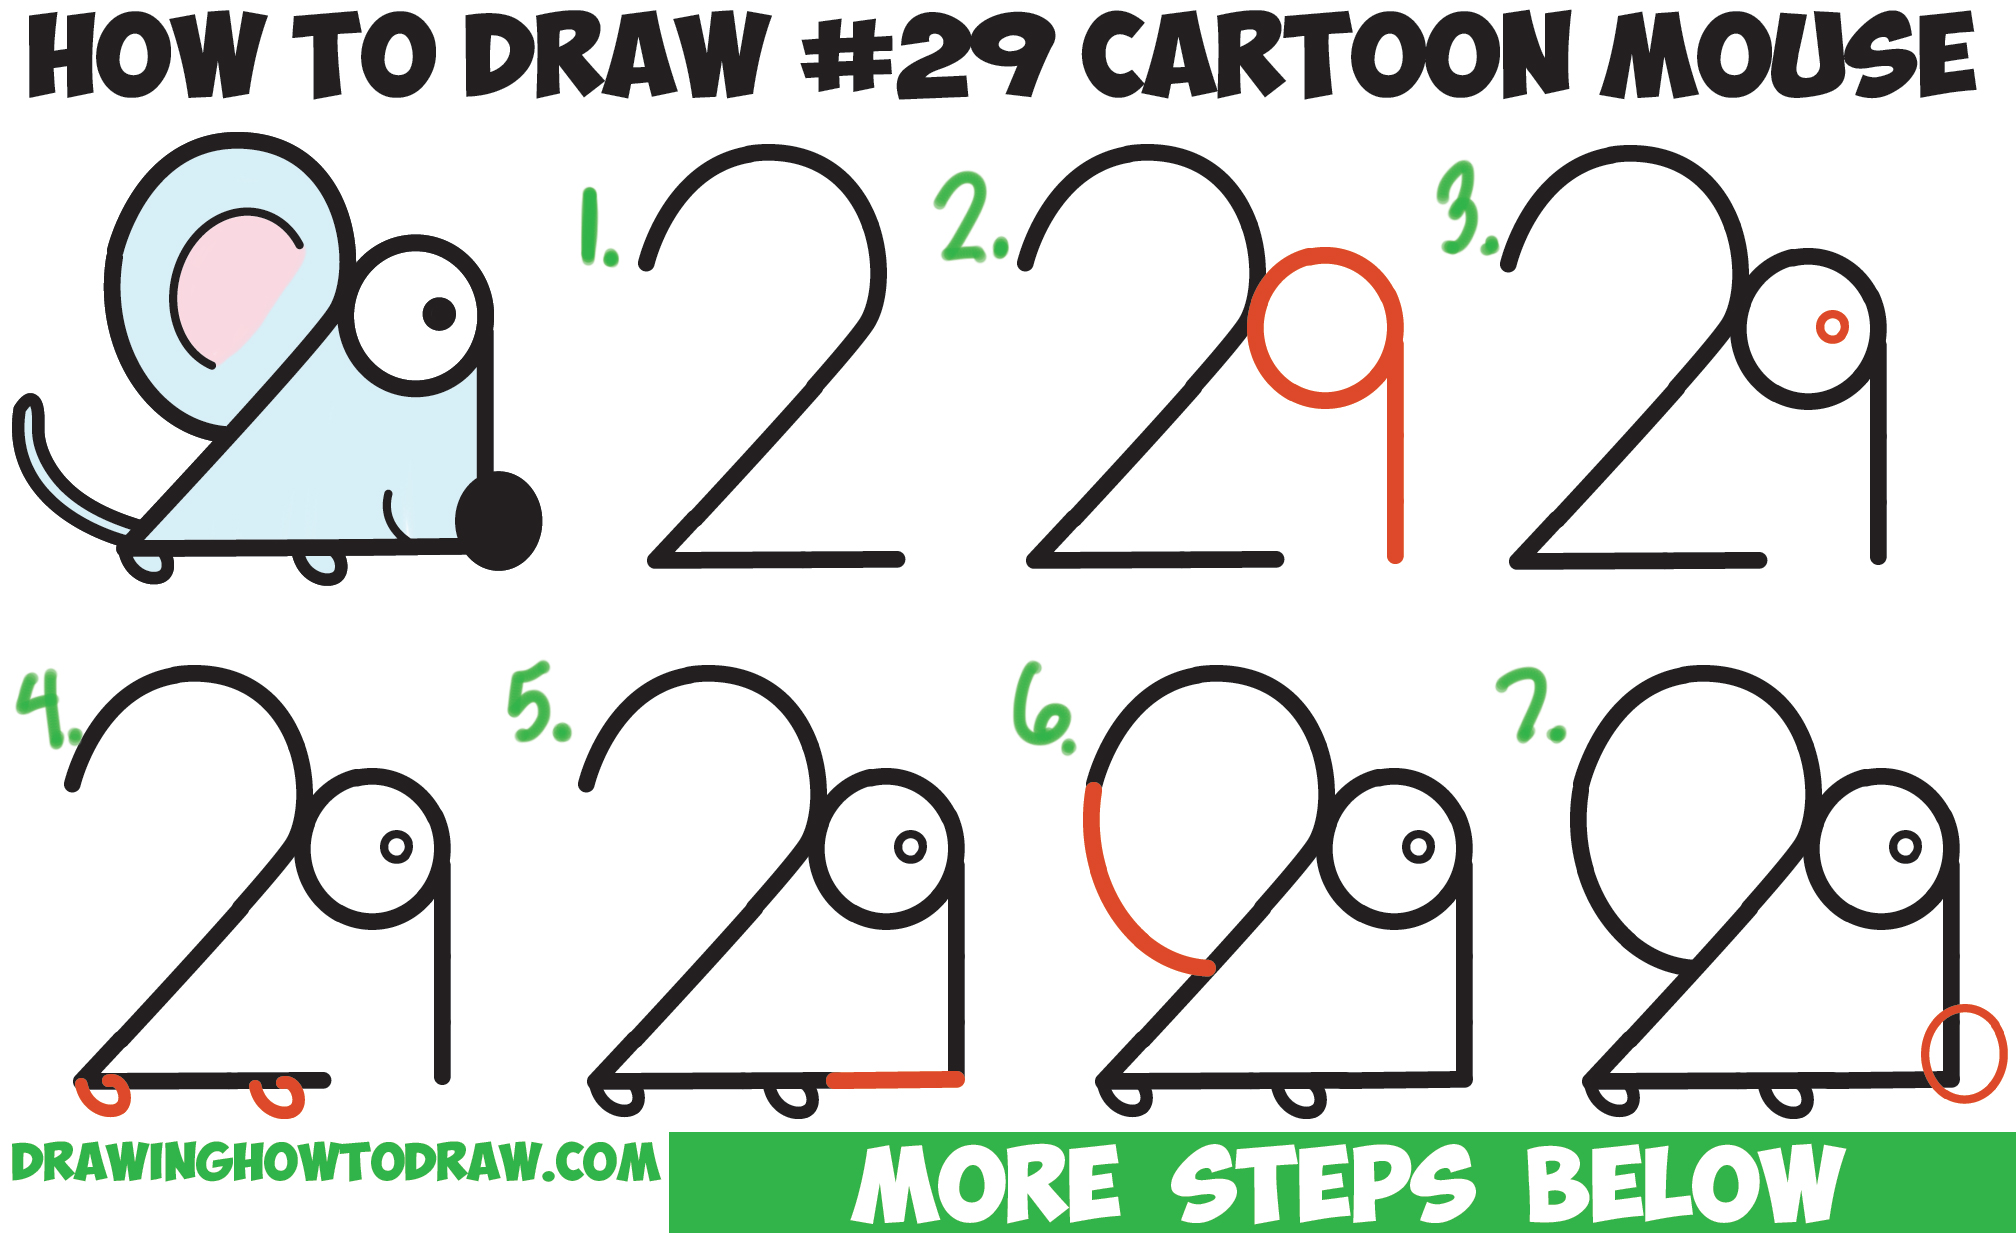 How to Draw a Cartoon Mouse from Numbers "29" in Easy Step by Step Drawing Tutorial for Kids